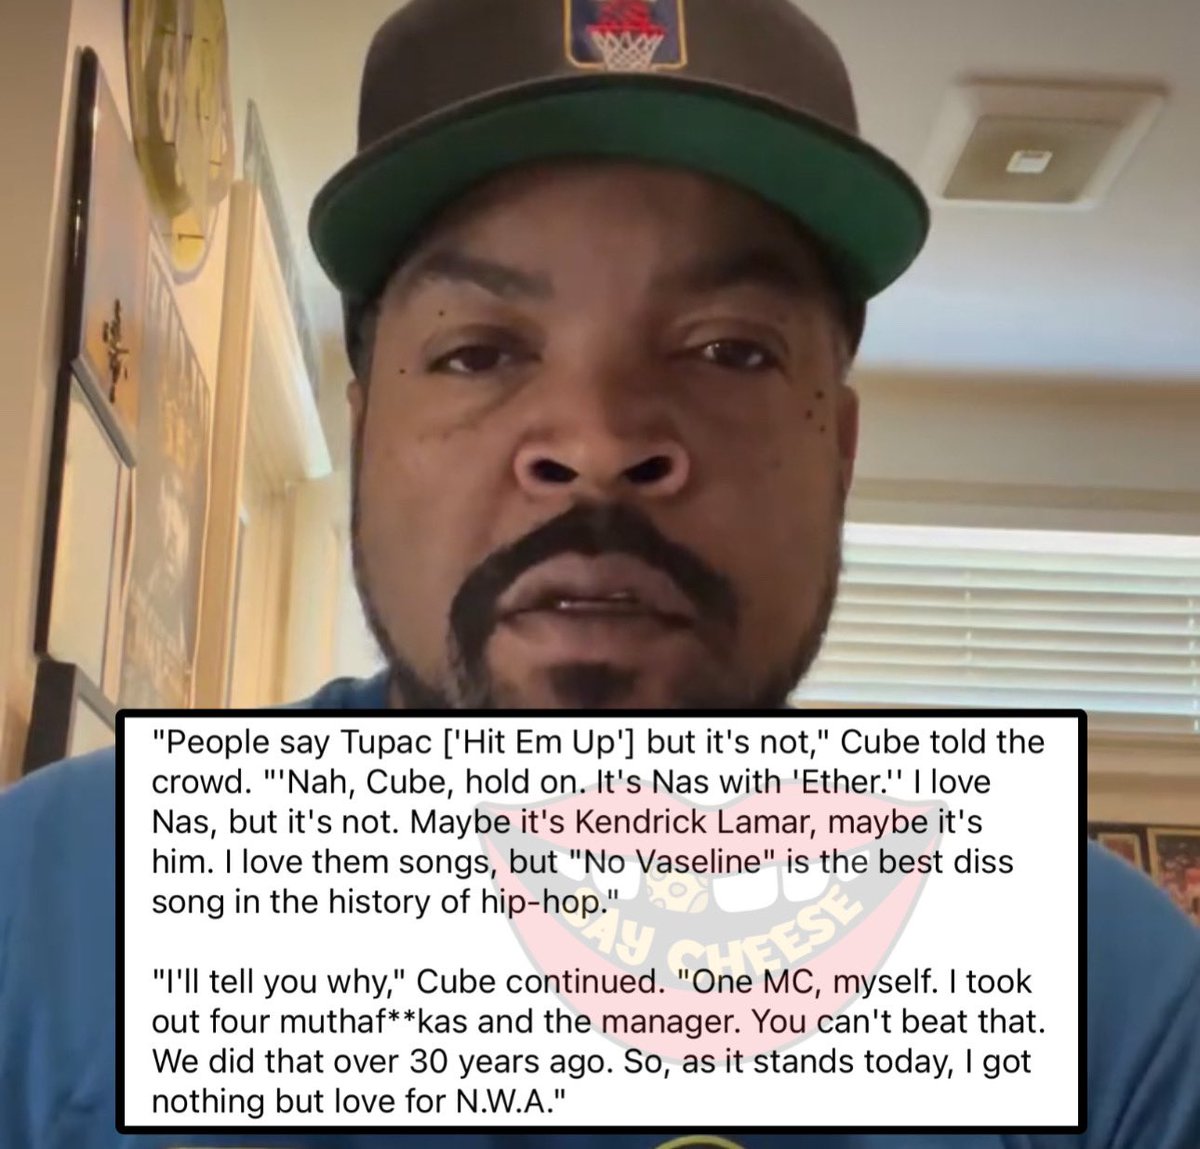 Ice Cube calls 'No Vaseline' the best diss song in the history of hip-hop and says that diss songs by 2Pac, Nas, and Kendrick Lamar are not better than 'No Vaseline.'